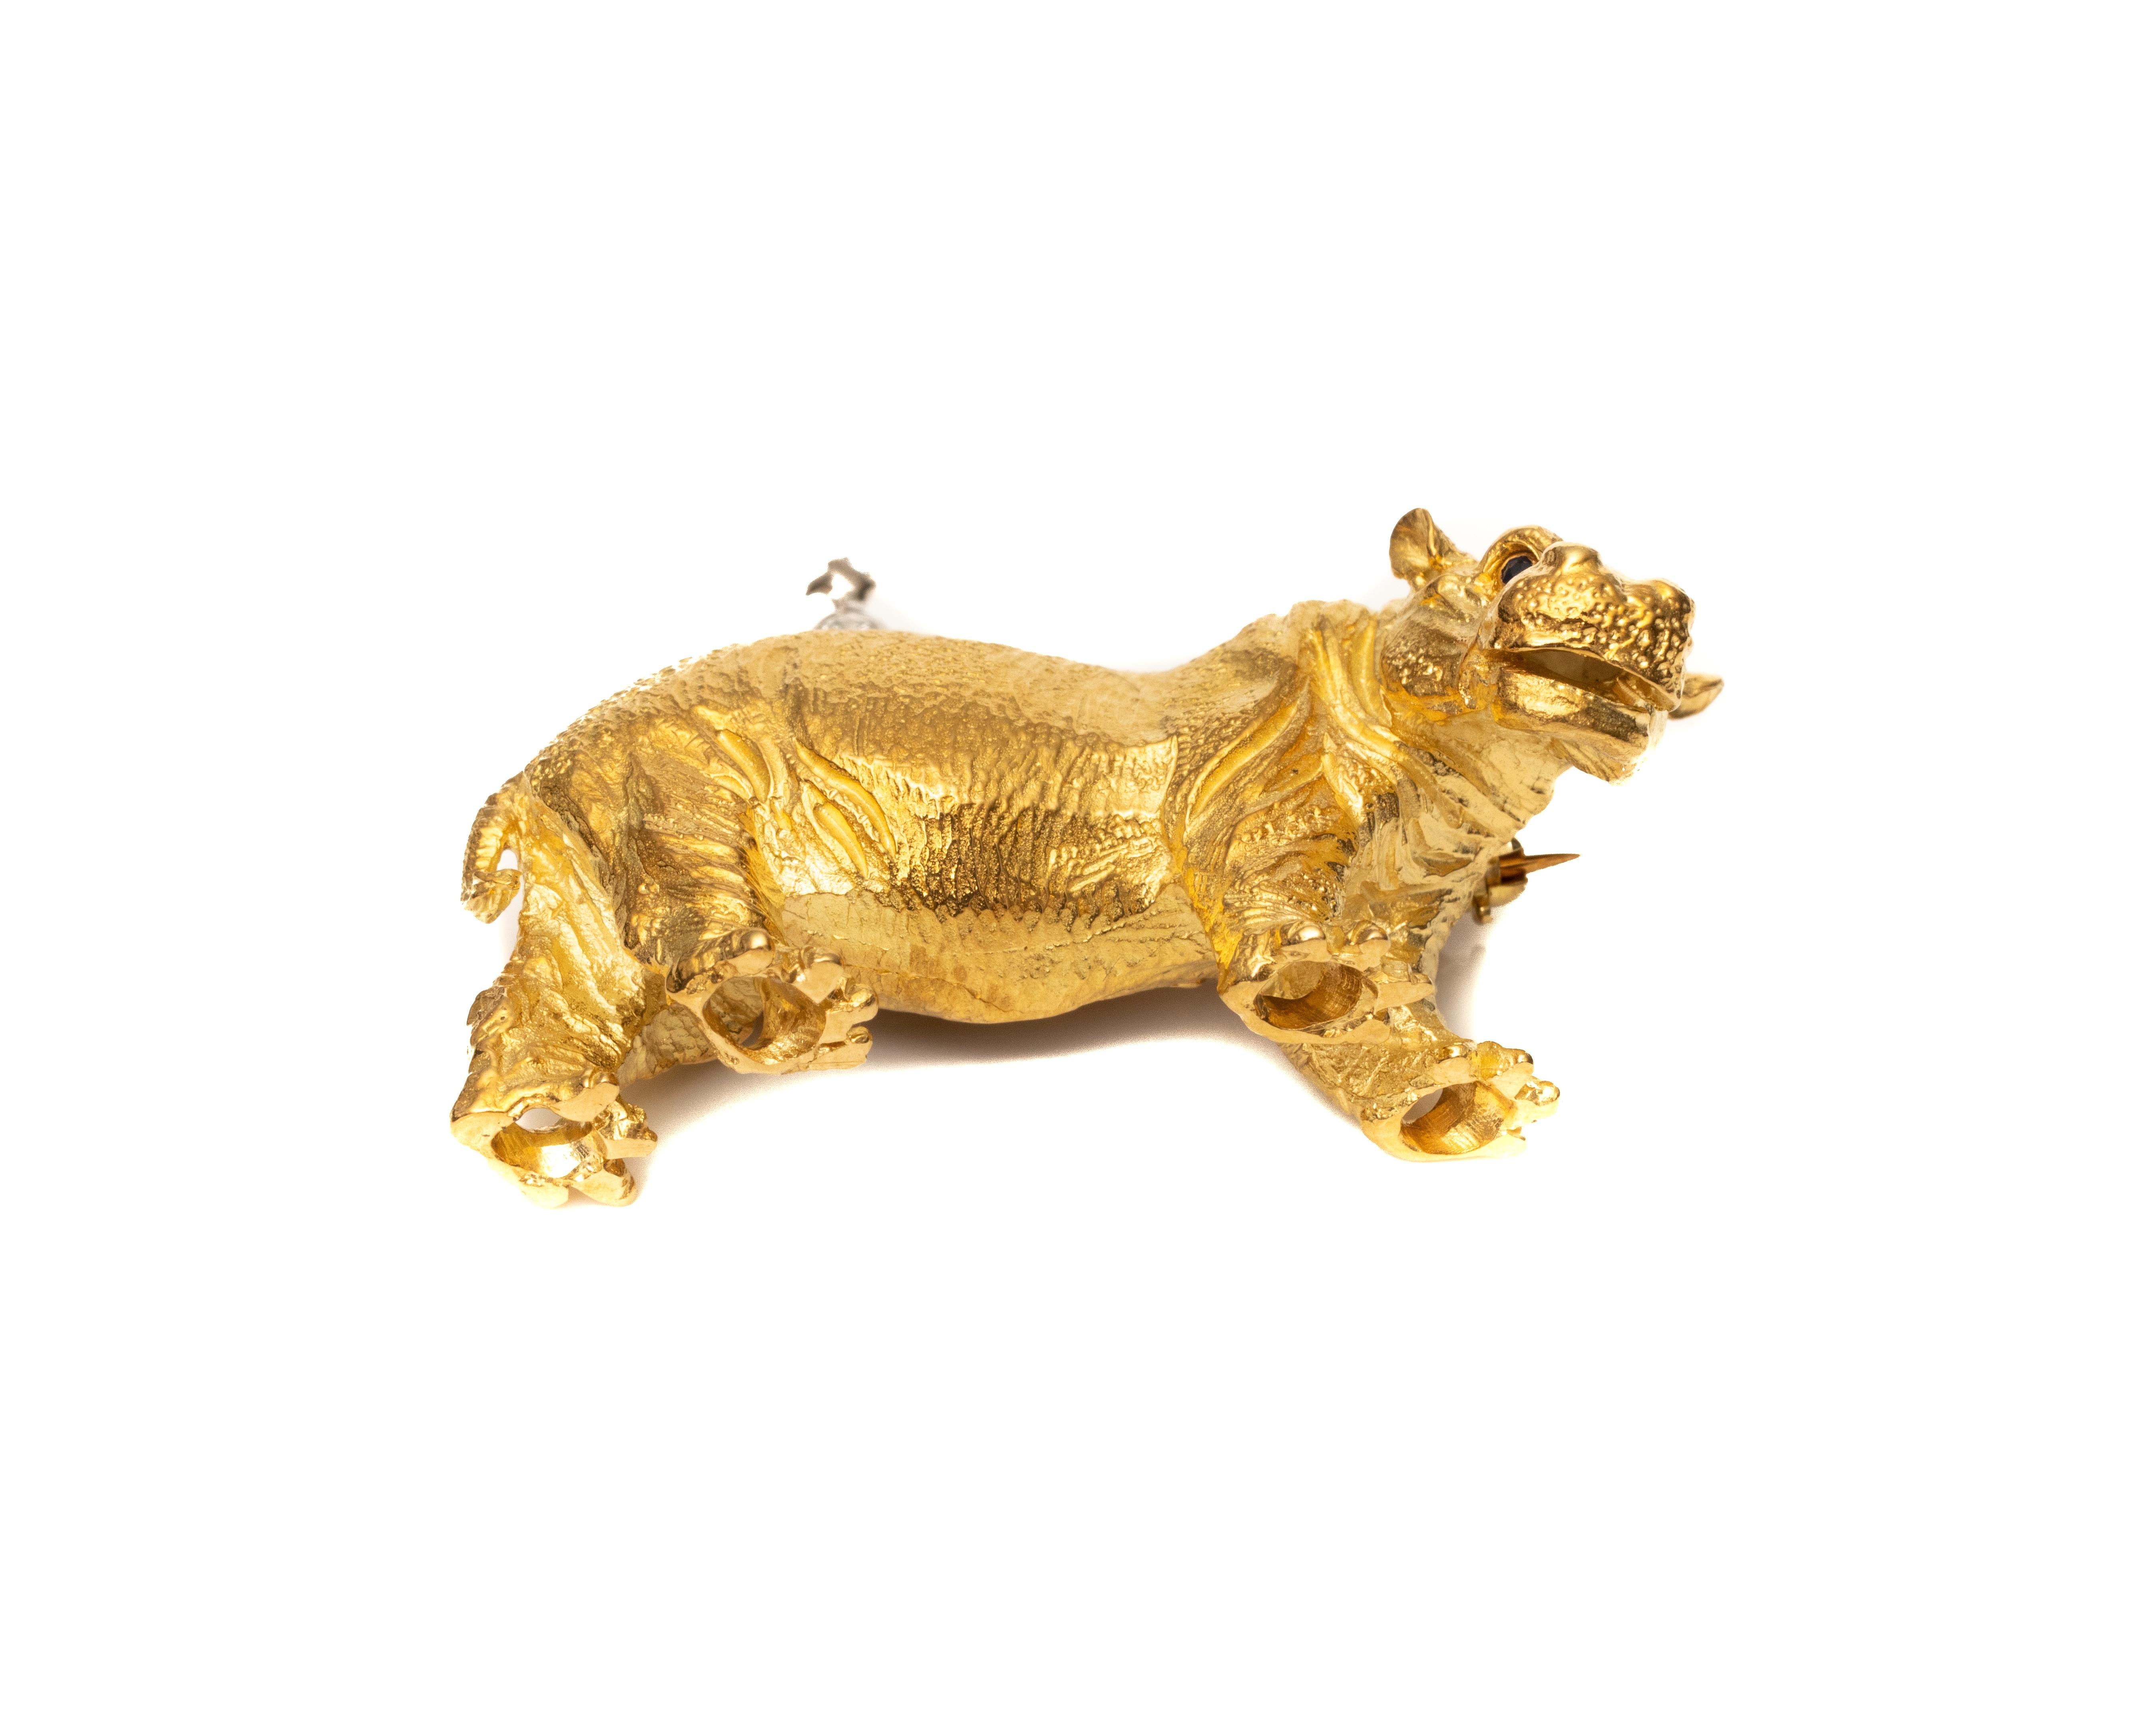 Beautiful pin brooch from 1991, Tiffany & Co. made and crafted in Germany
It features a hippopotamus made of high contrast 18 karat yellow gold. There is an adorable bird made with accent diamonds, perched on top of the hippopotamus's back. It is a